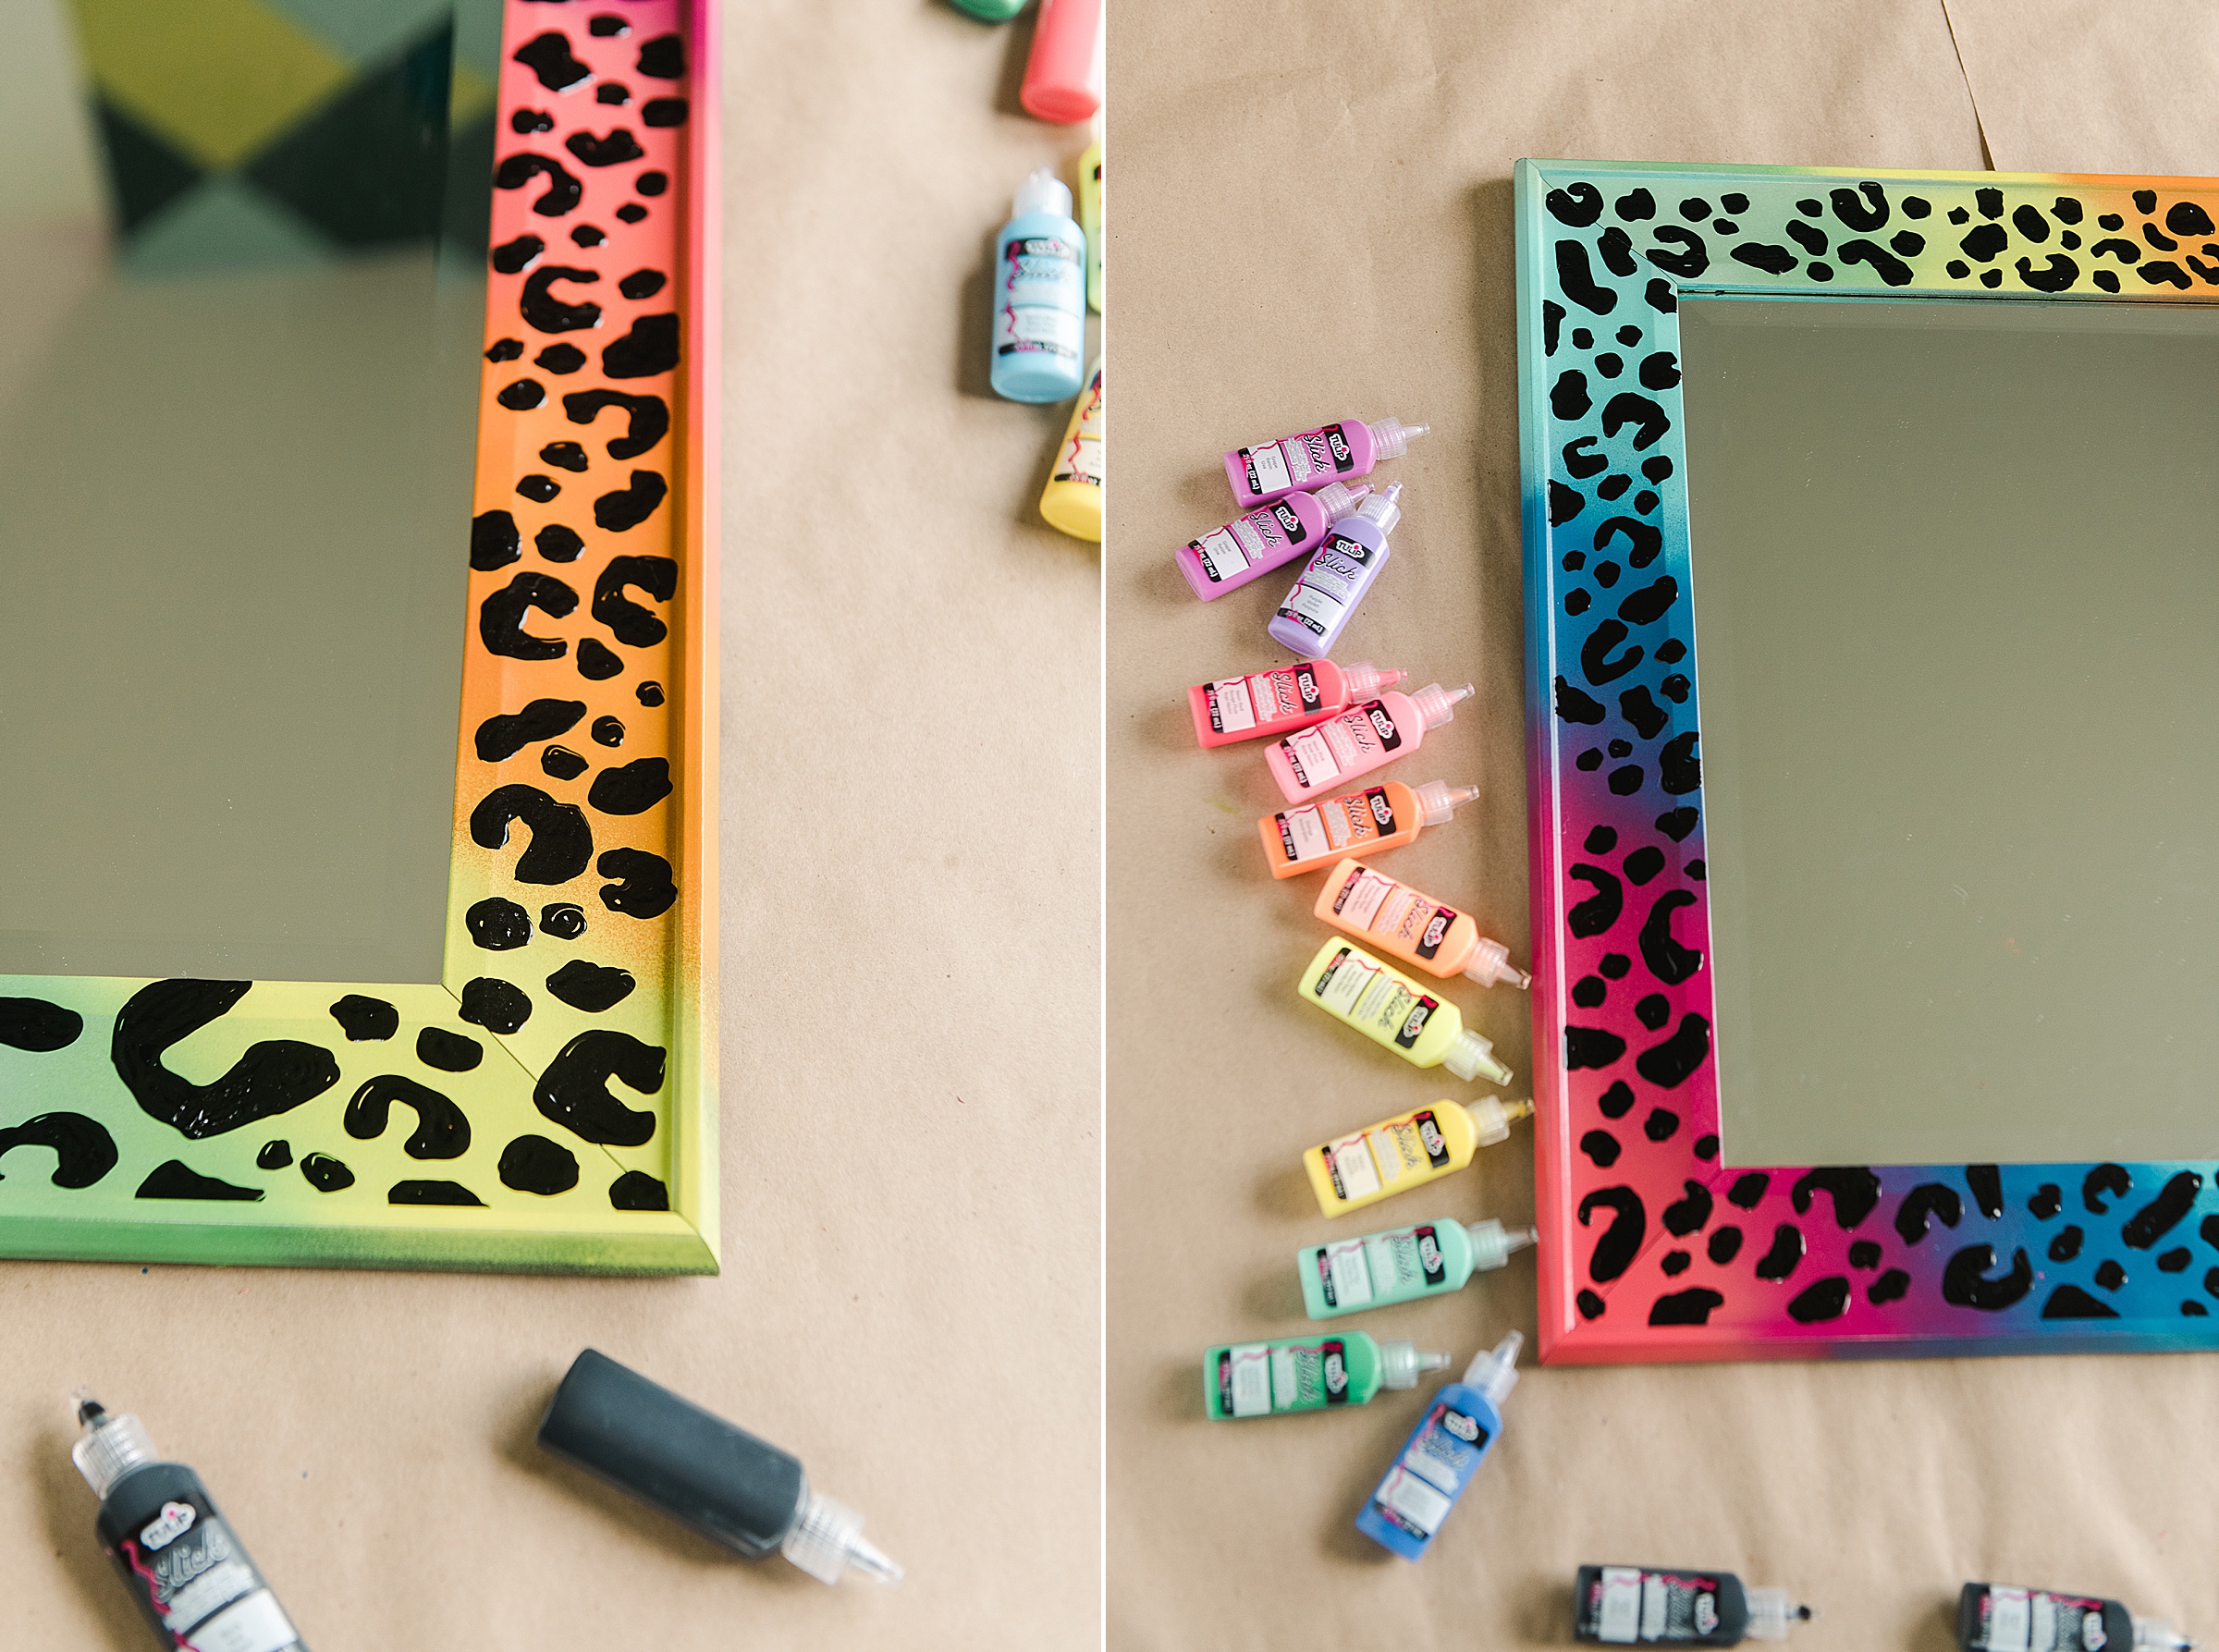 Lisa Frank inspired painting, Lisa Frank inspired DIY, colorful leopard print painting, Leopard print painted mirror, 90s decor ideas, 90s decor